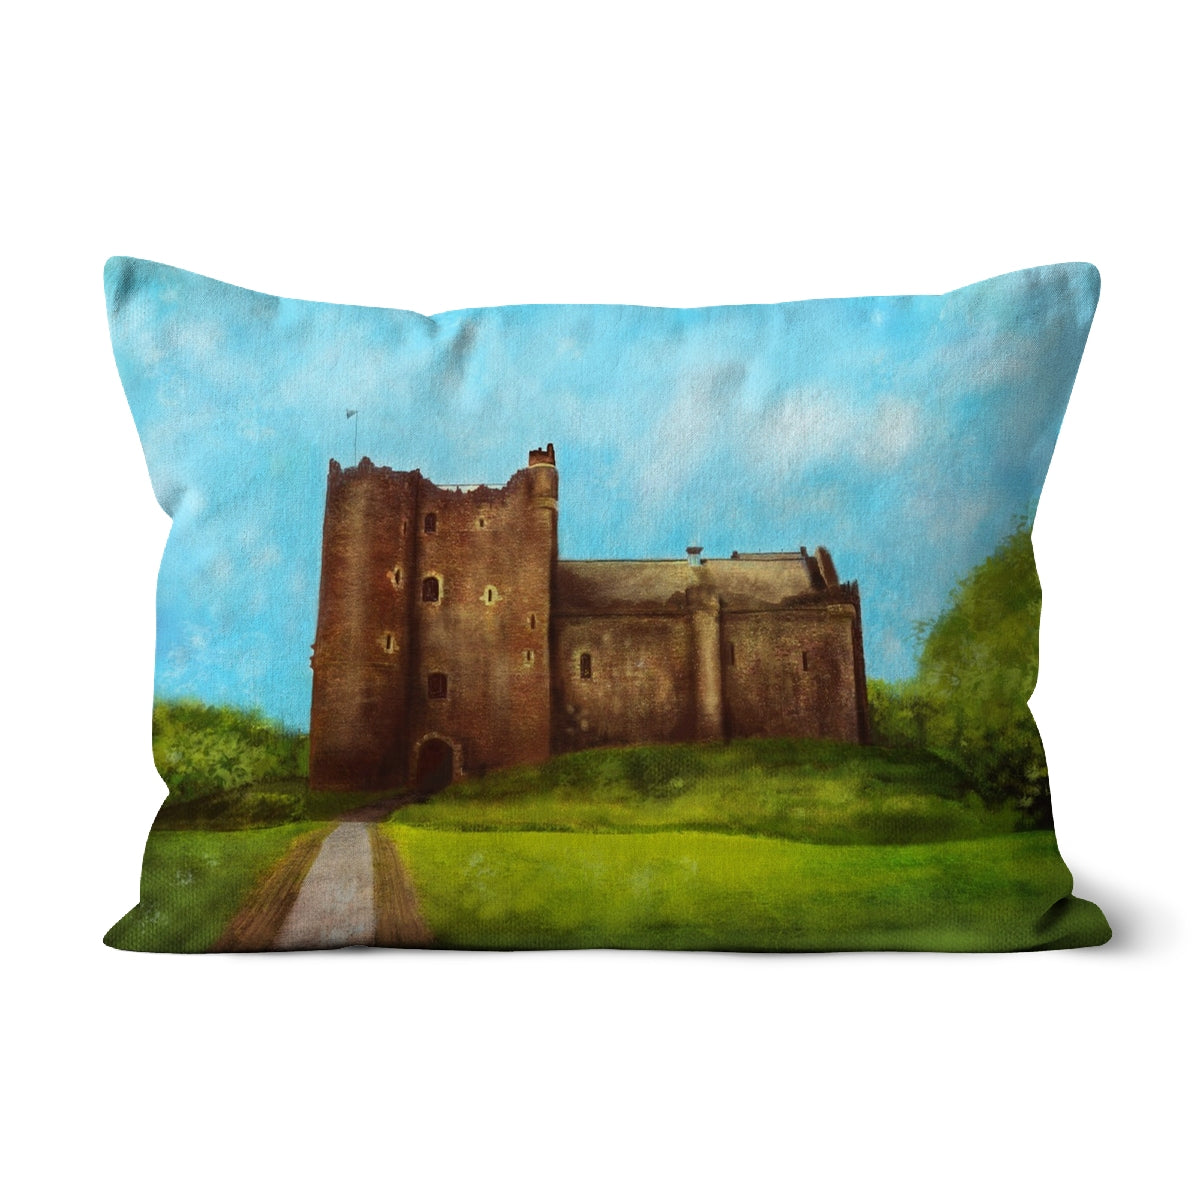 Doune Castle Art Gifts Cushion-Cushions-Historic & Iconic Scotland Art Gallery-Canvas-19"x13"-Paintings, Prints, Homeware, Art Gifts From Scotland By Scottish Artist Kevin Hunter